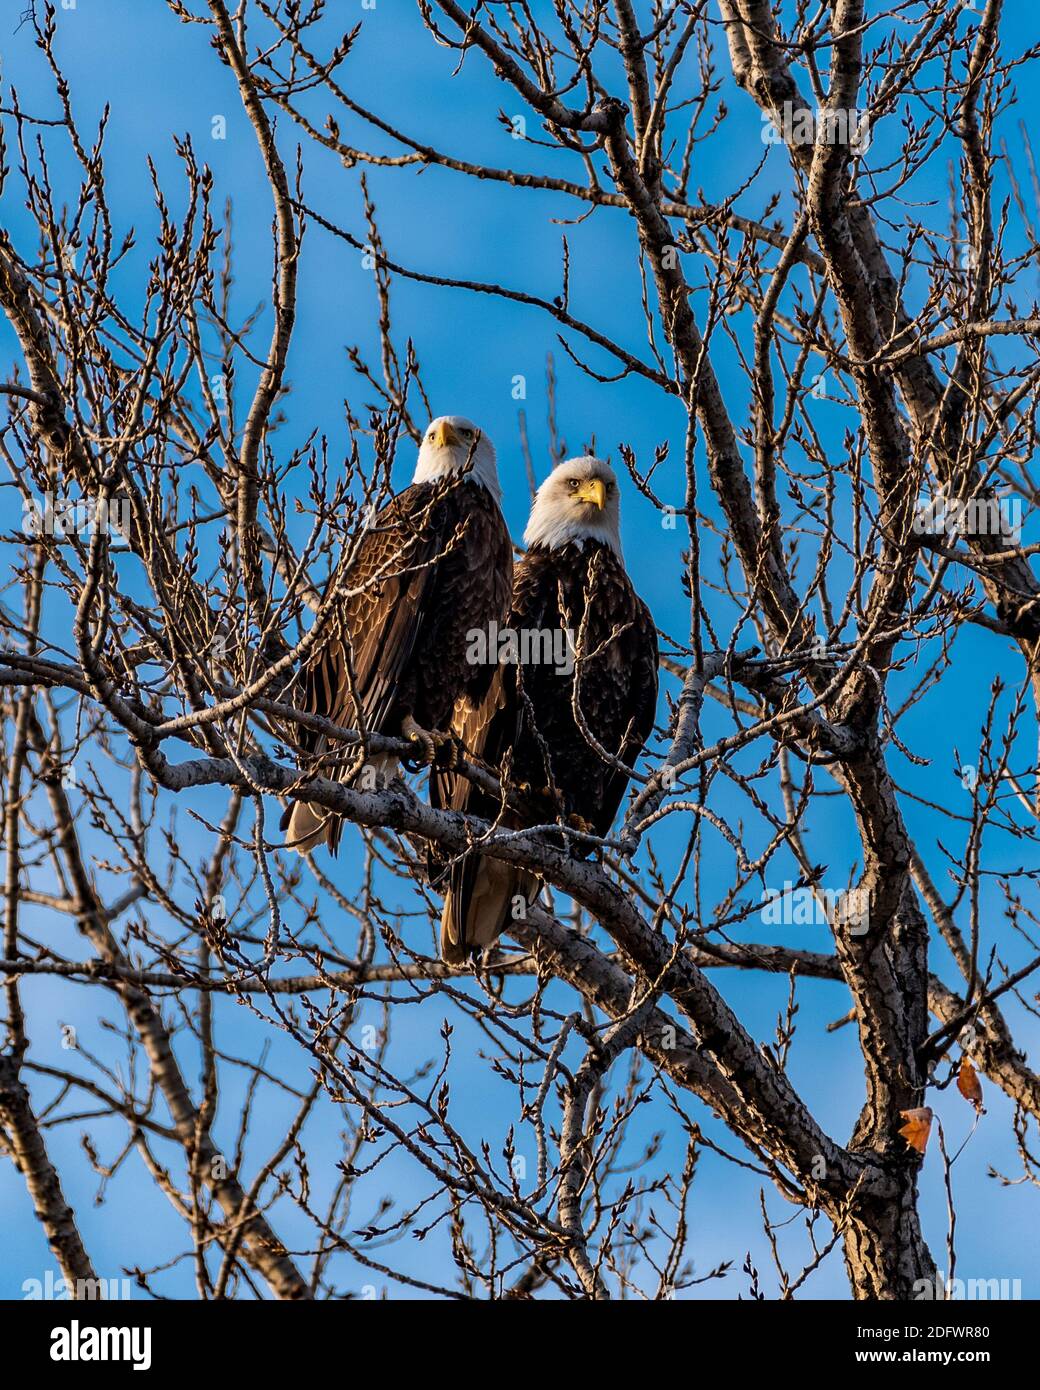 Bald Eagle Pair Perched in Tree Stock Photo